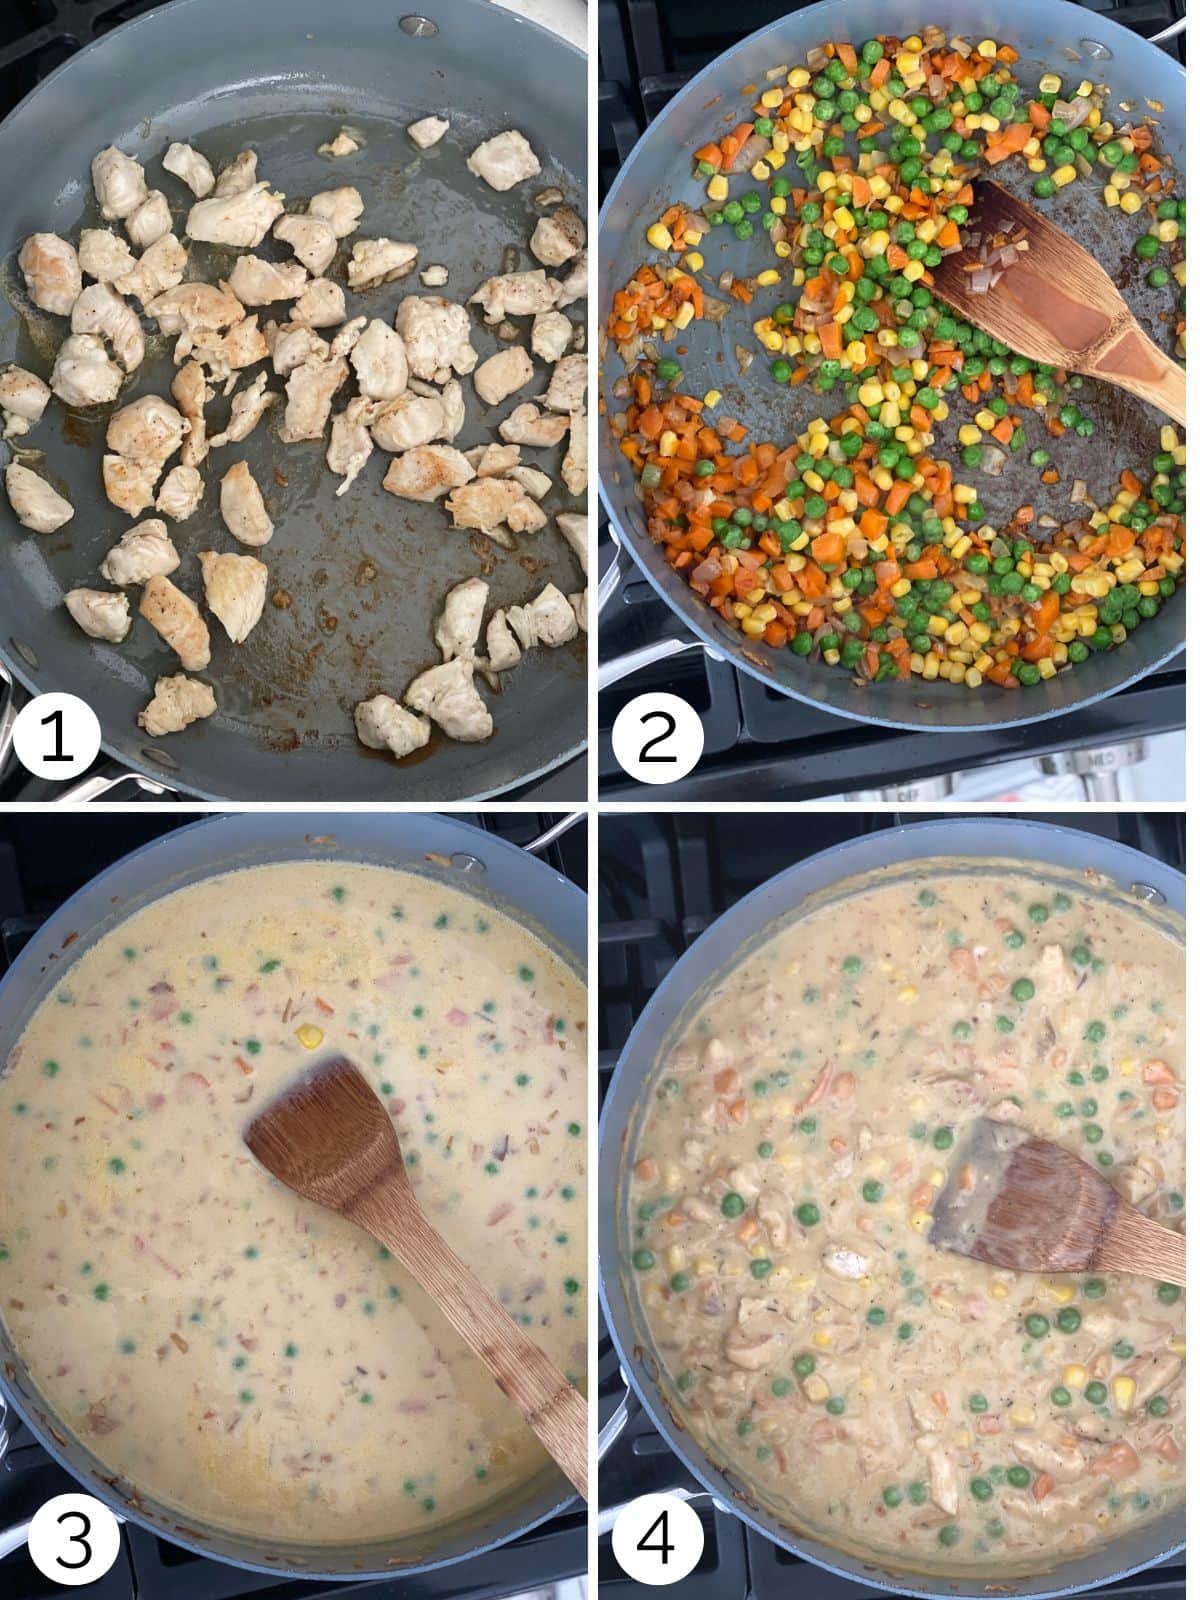 Instructional photos of the chicken pot pie filling being thickened in a pan.